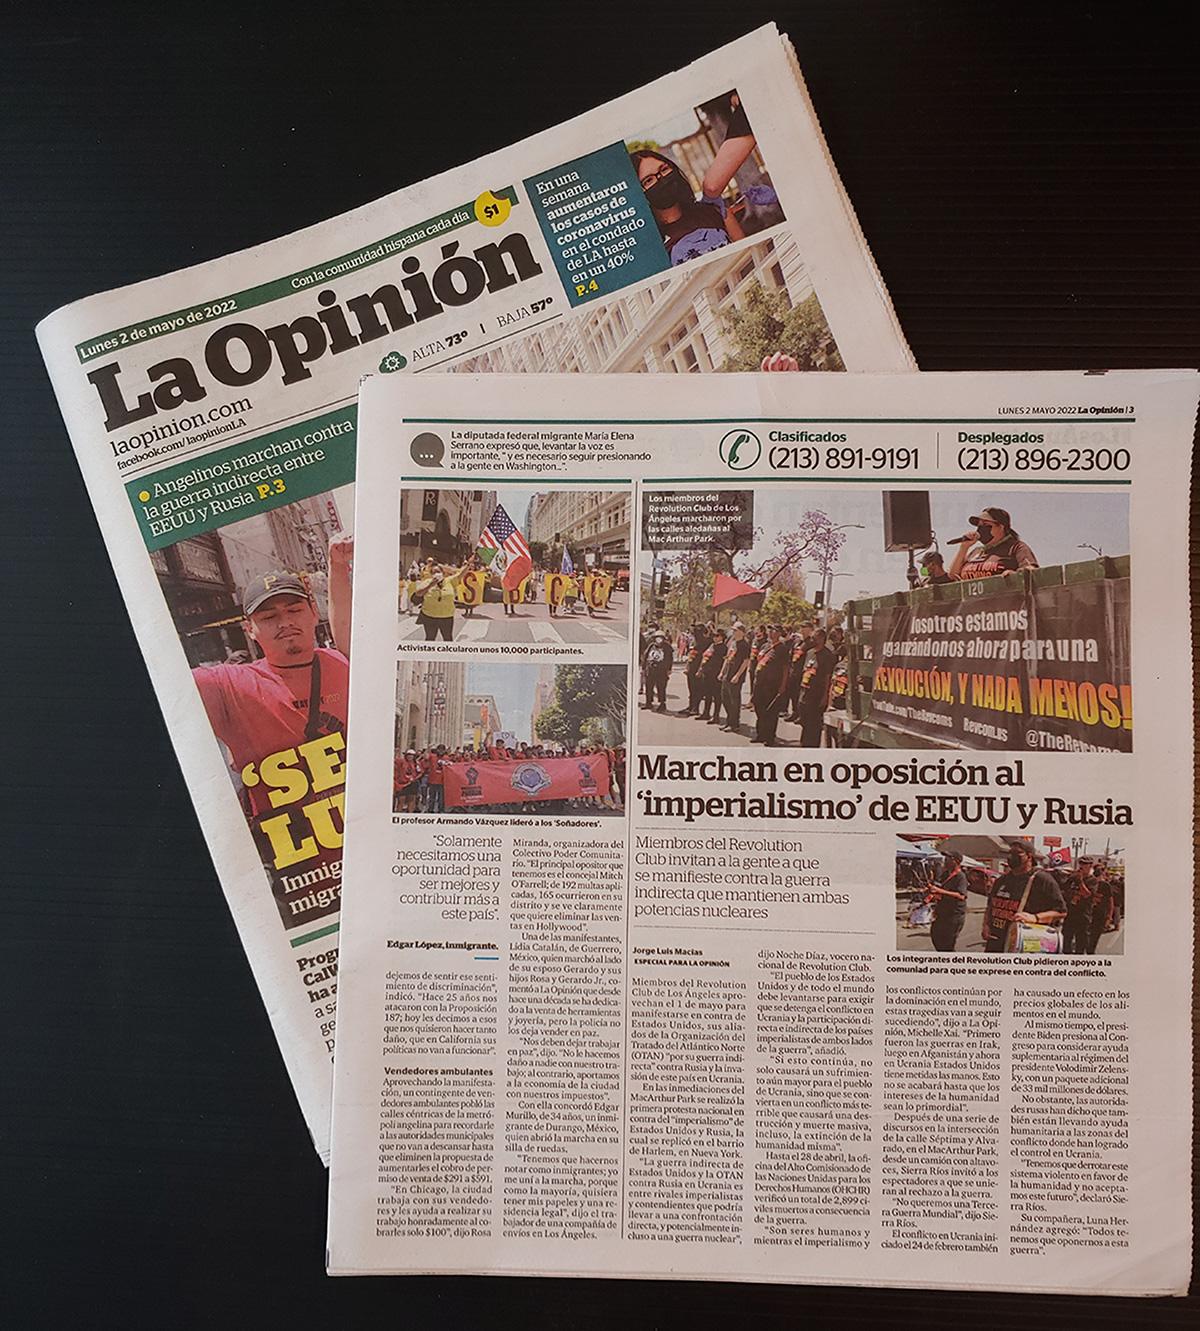 Image of La Opinion article on May Day activities.